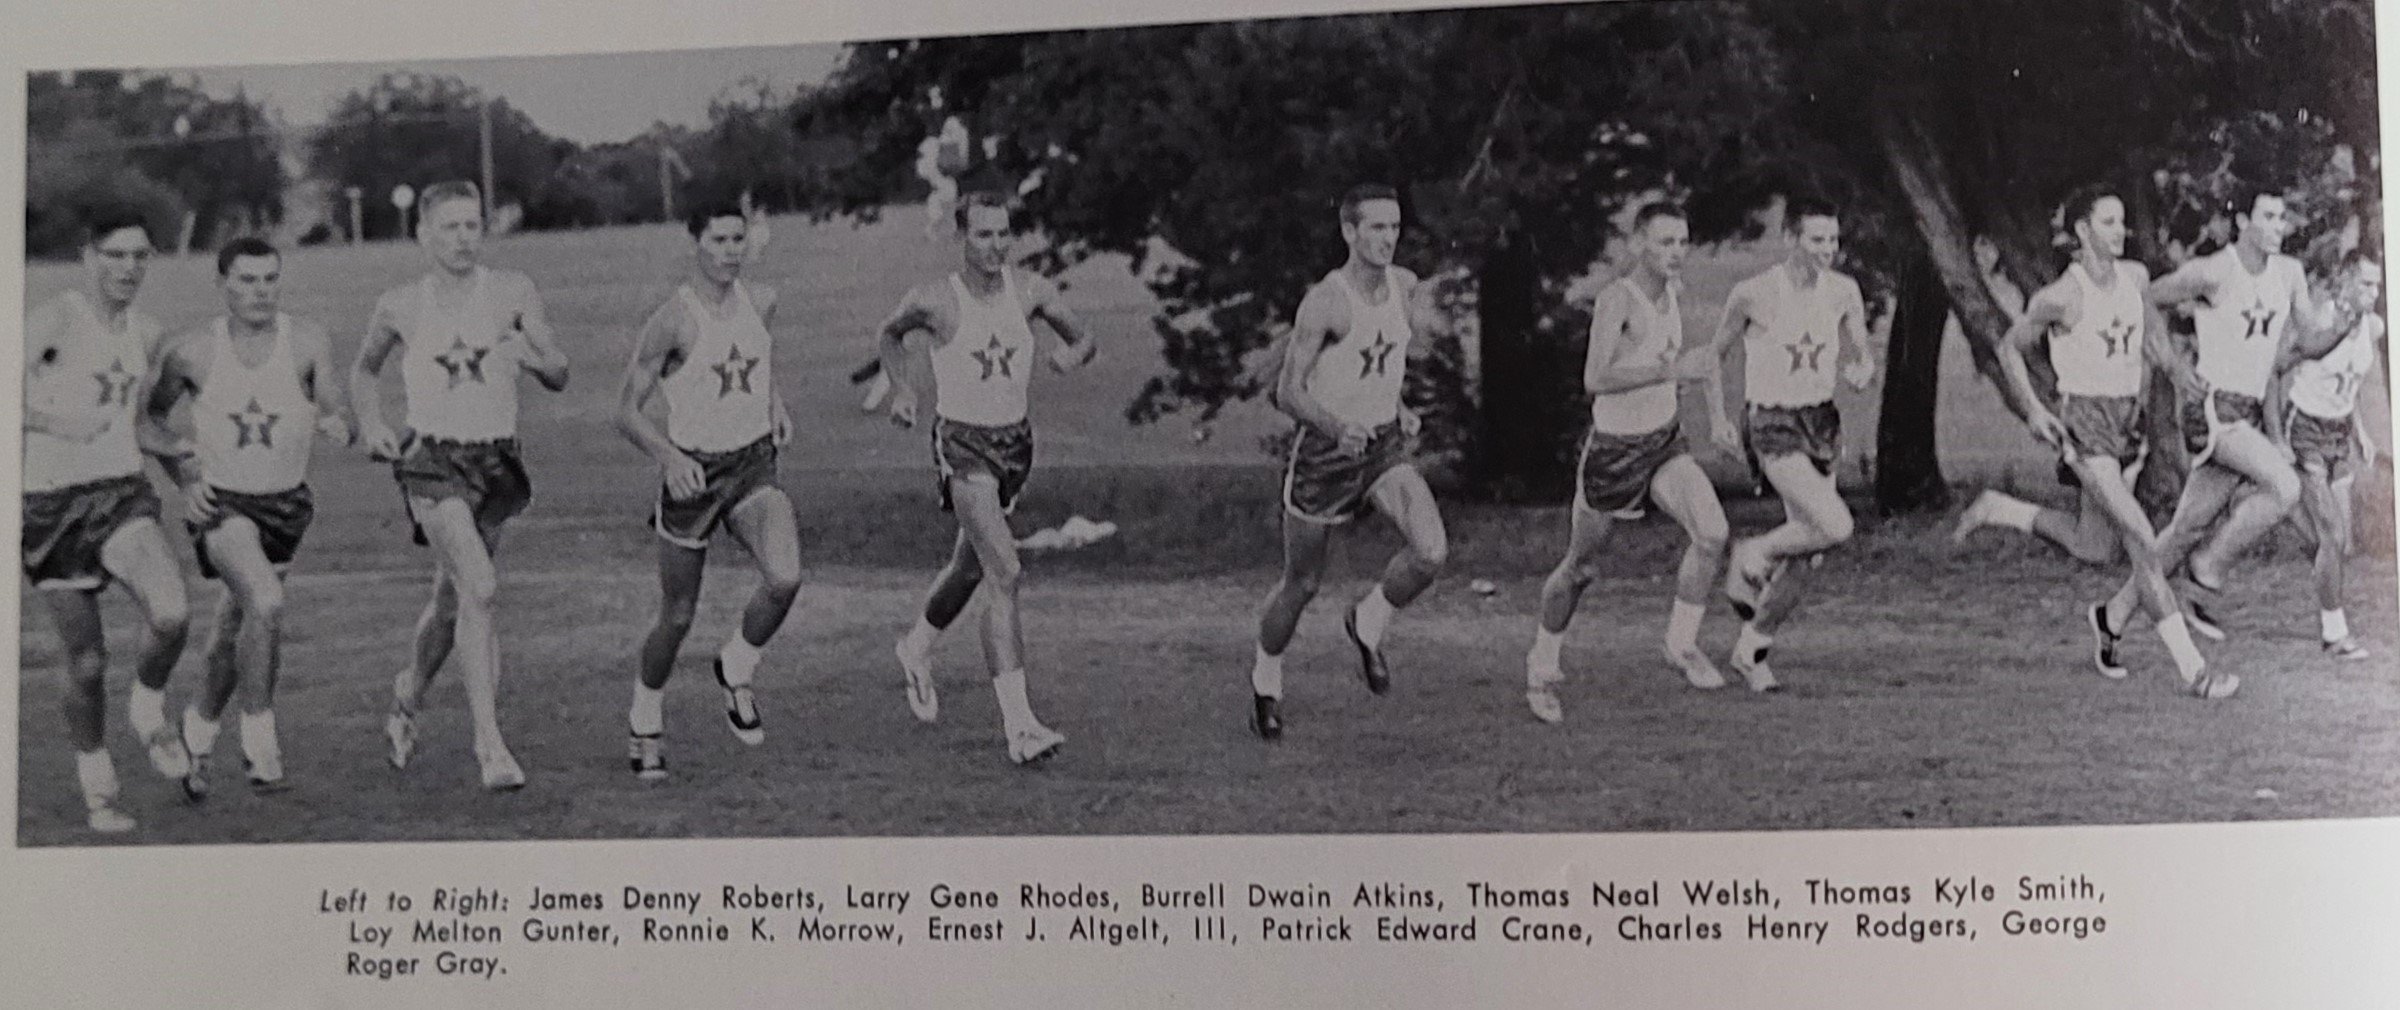  1960-1961 cross country    Roberts, Rhodes, Atkins, Welsh, Smith, Gunther, Morrow, Altgelt, Crane Rodgers, Gray 